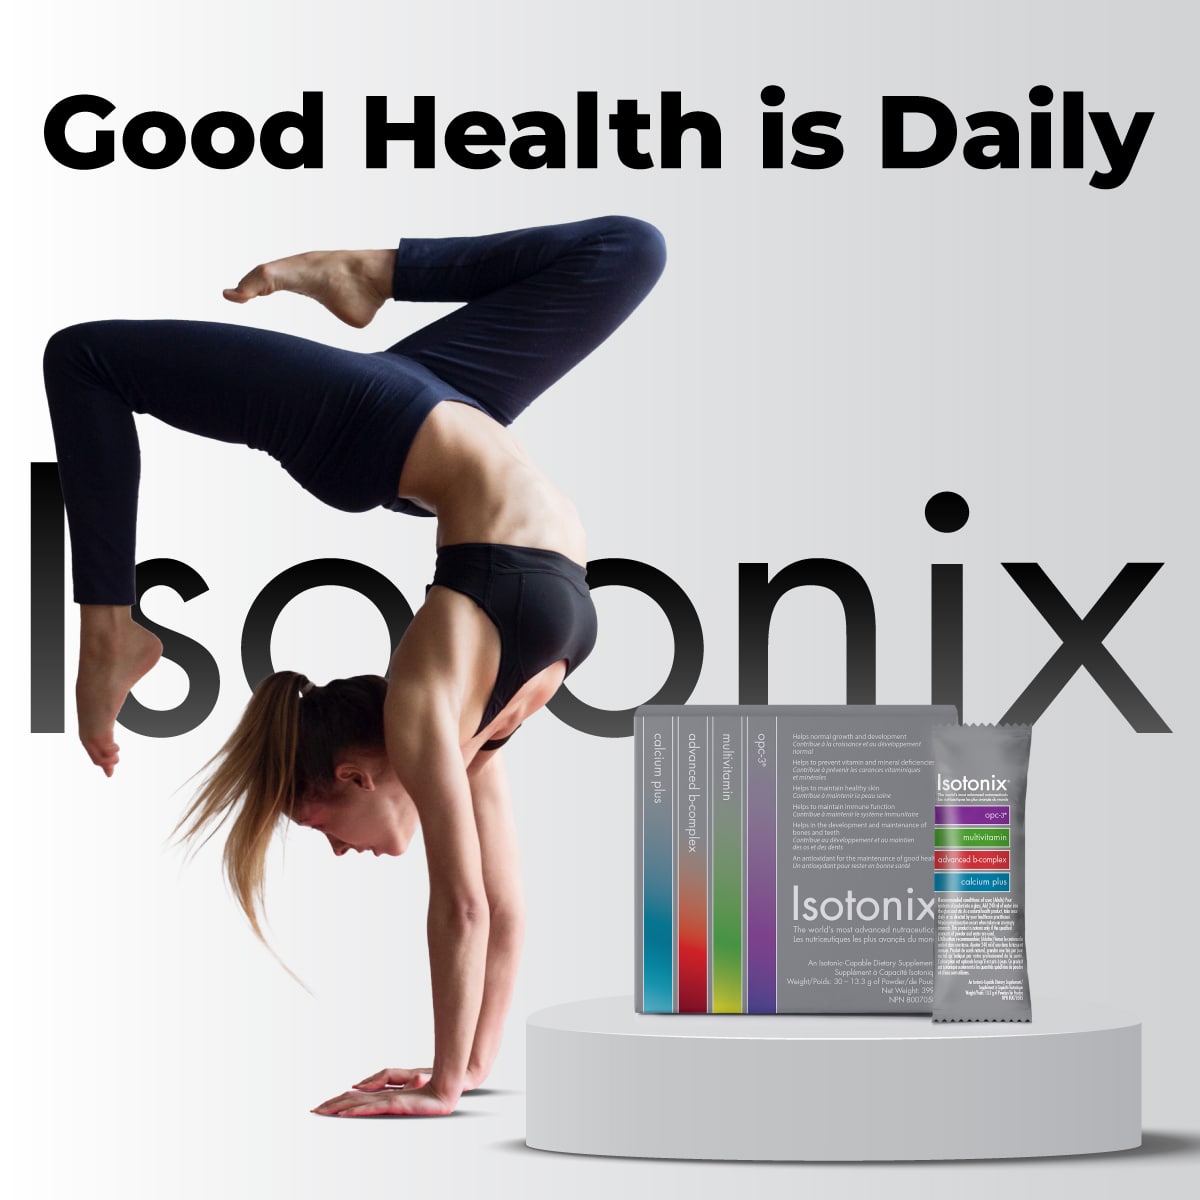 Primary Benefits of Isotonix® Daily Essentials Packets